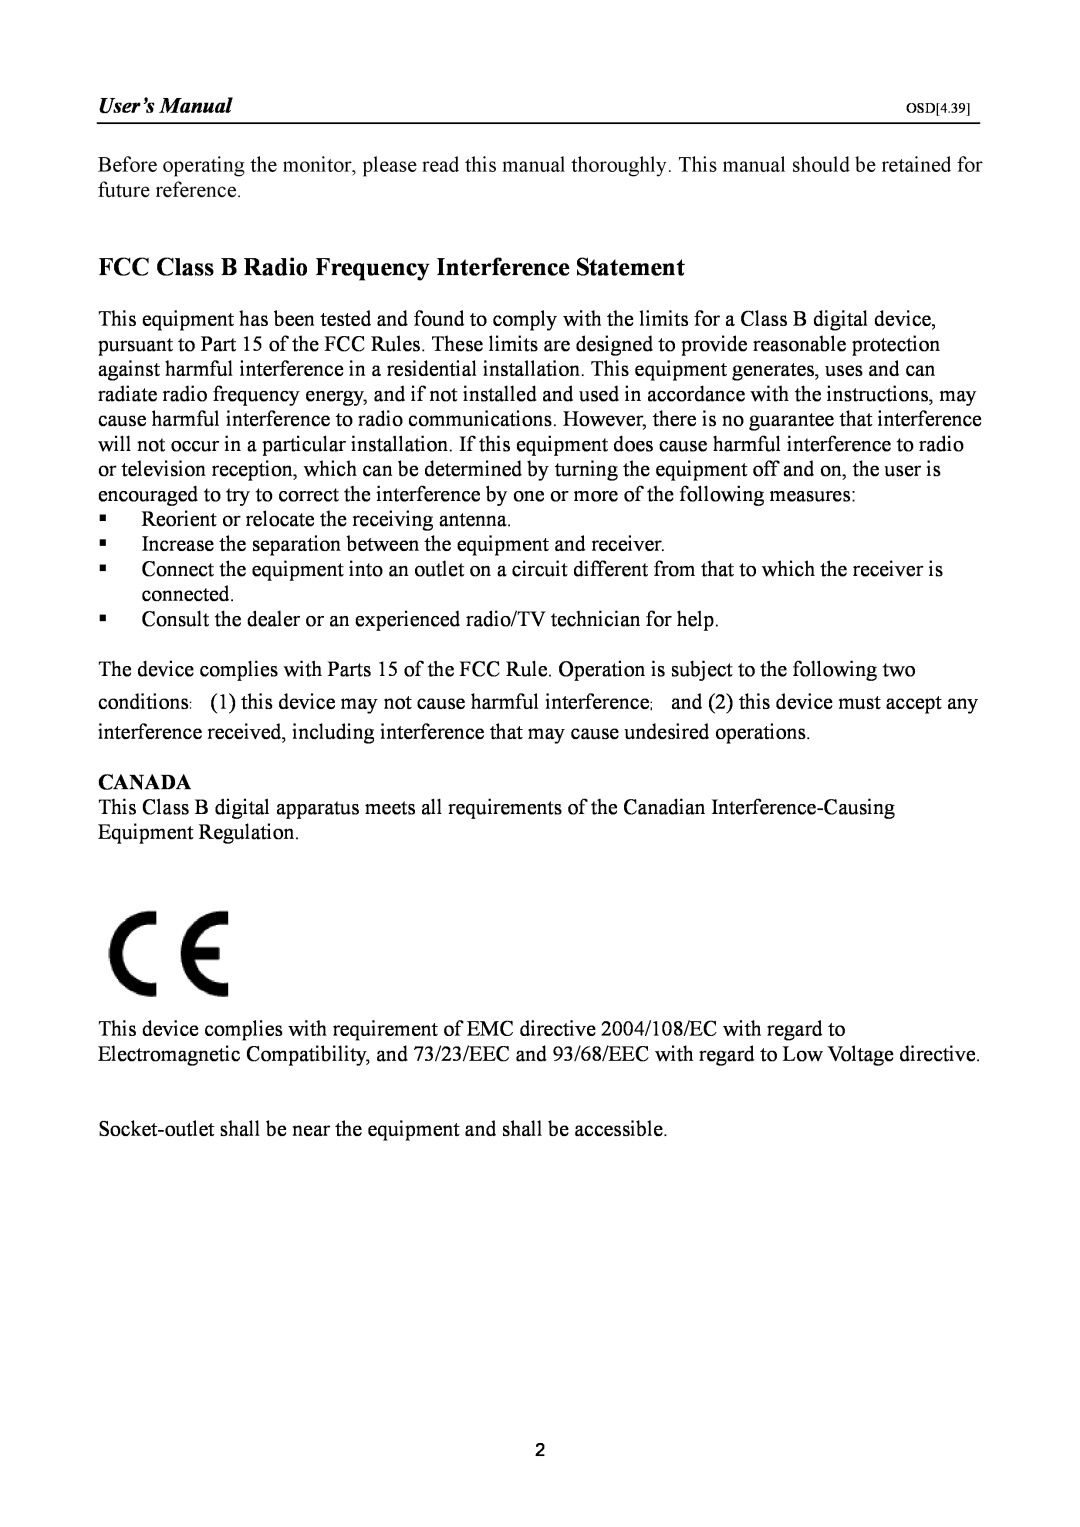 HANNspree HF205 manual FCC Class B Radio Frequency Interference Statement, User’s Manual, Canada 